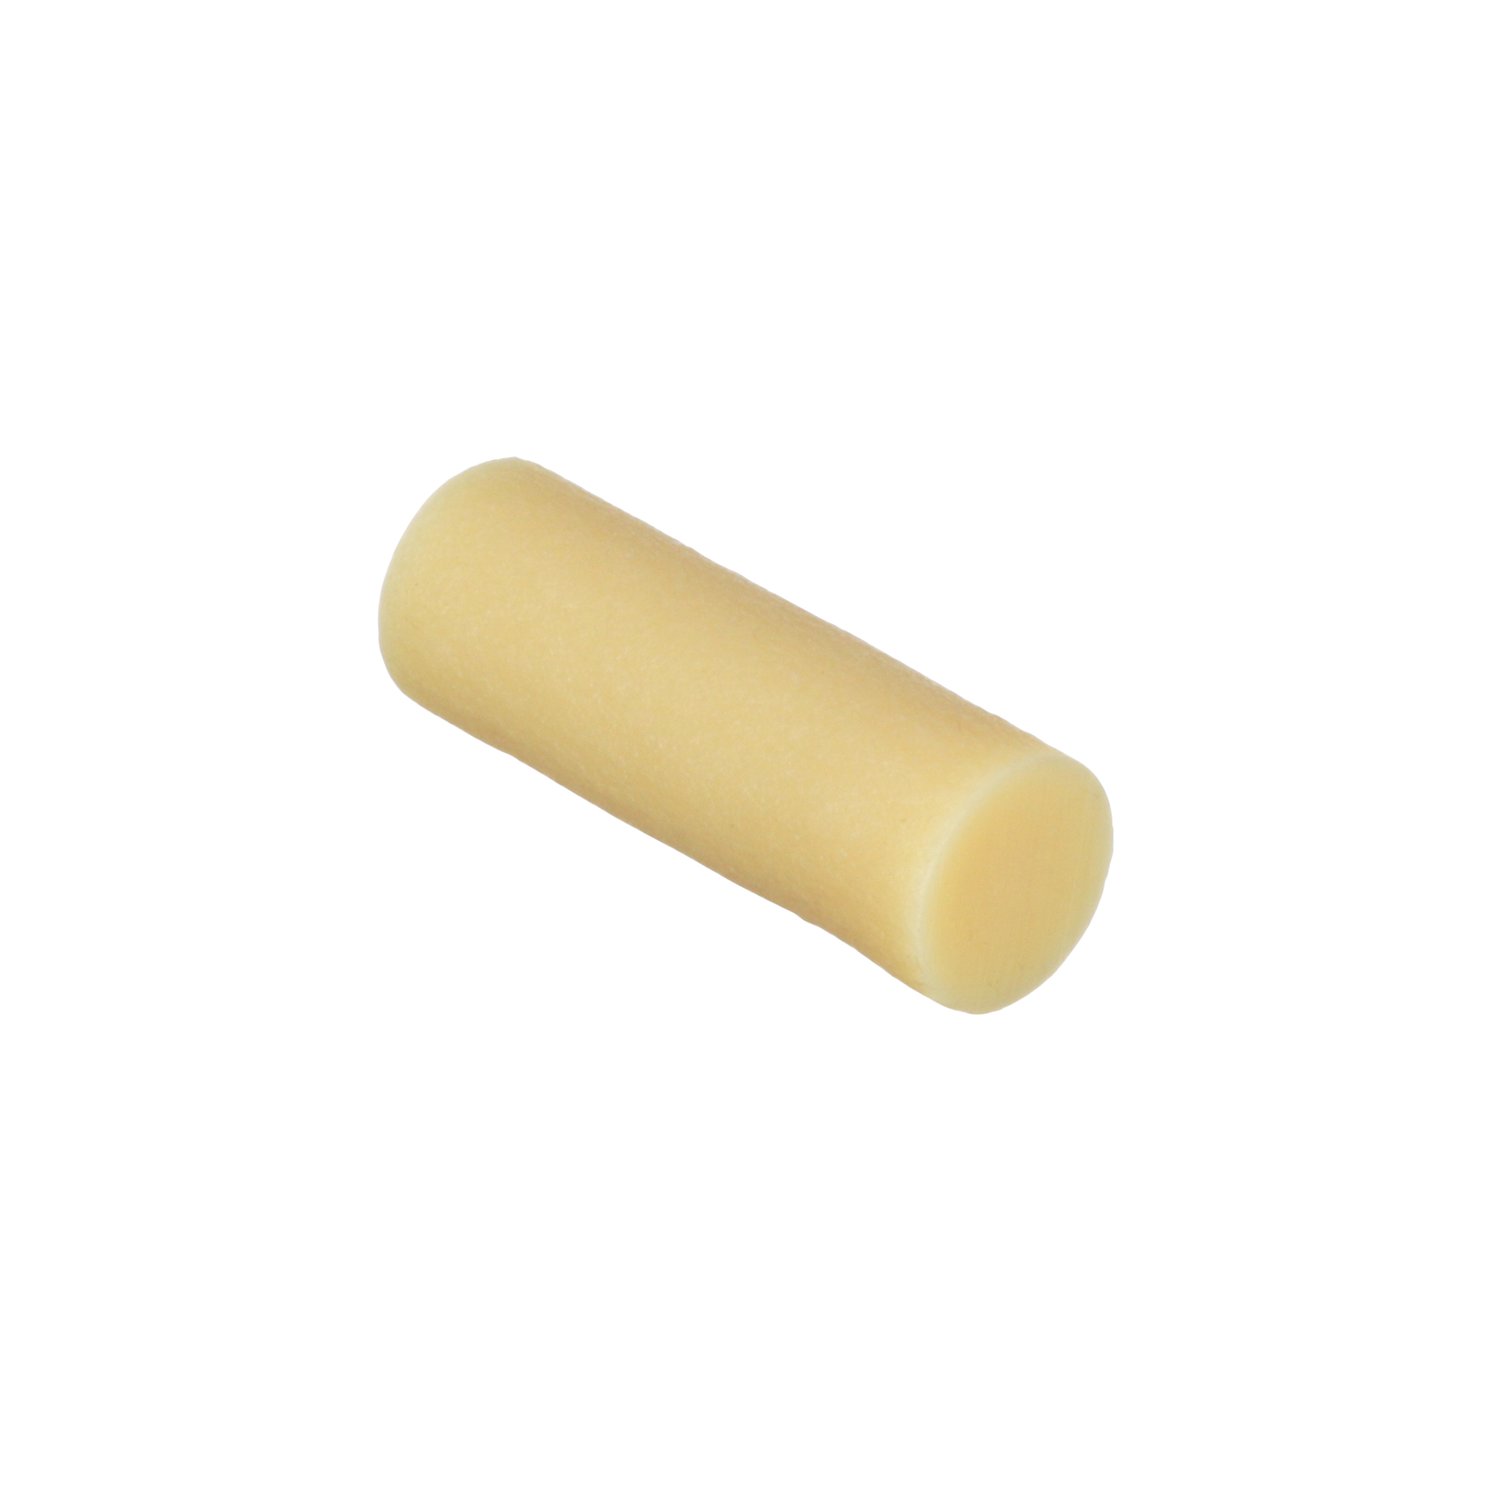 7100020337 - 3M Hot Melt Adhesive 3731 PG, Tan, 1 in x 3 in, 22 lb/case